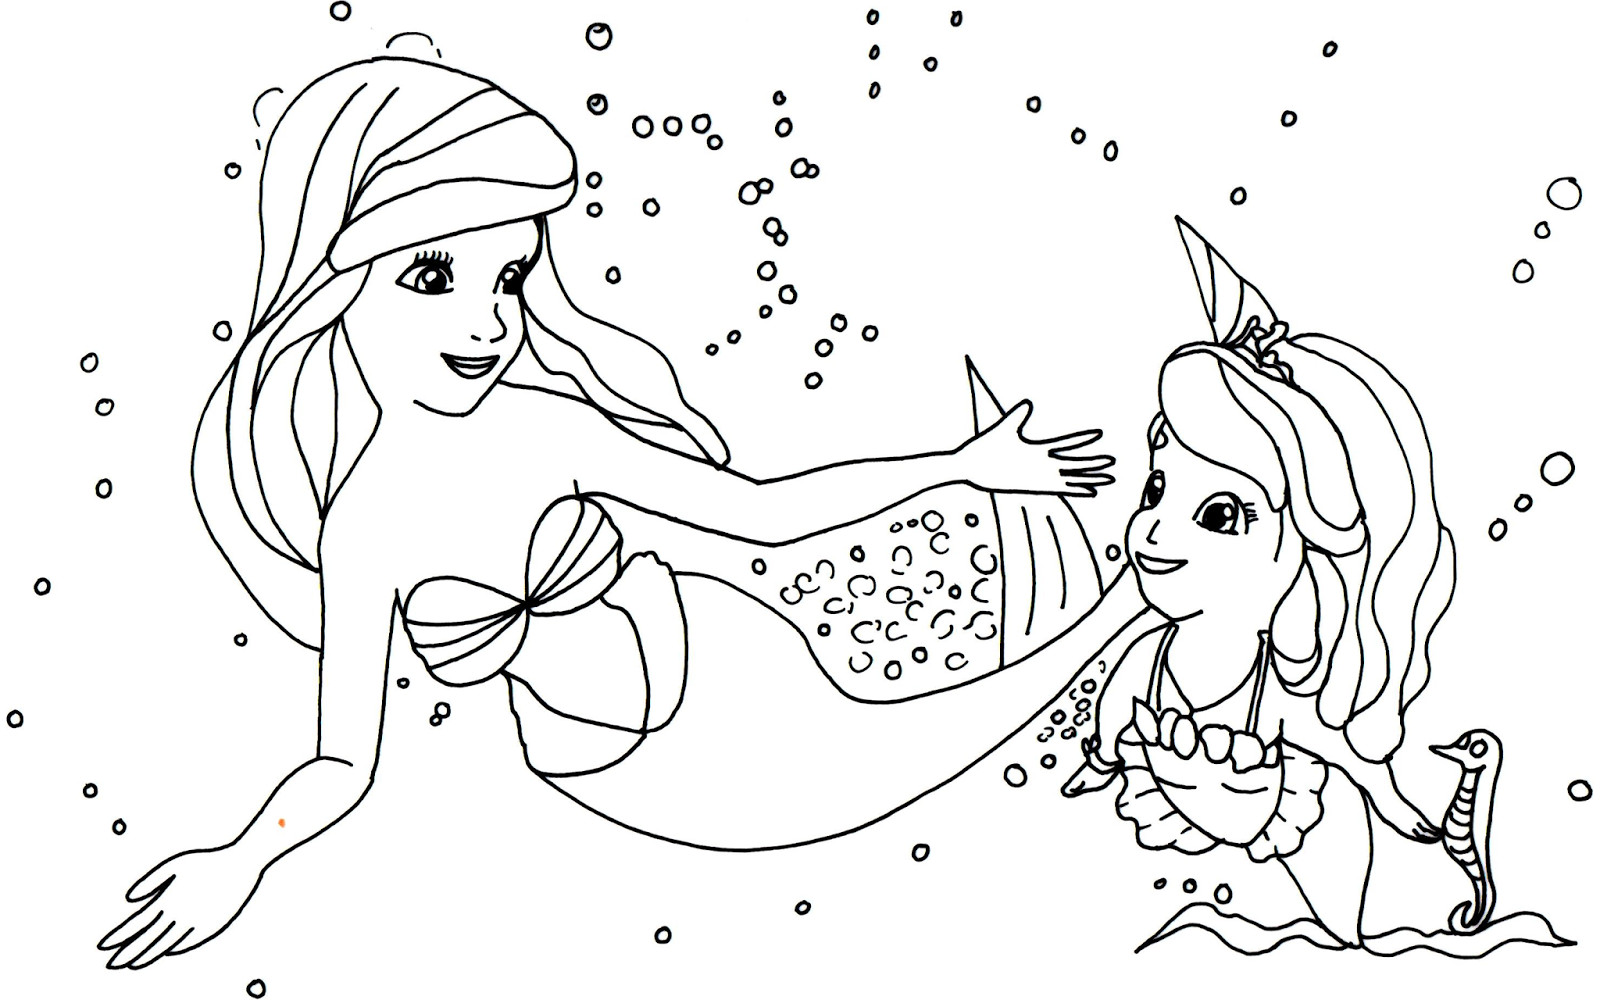 Sofia The First Coloring Pages
 Sofia the First Coloring Pages